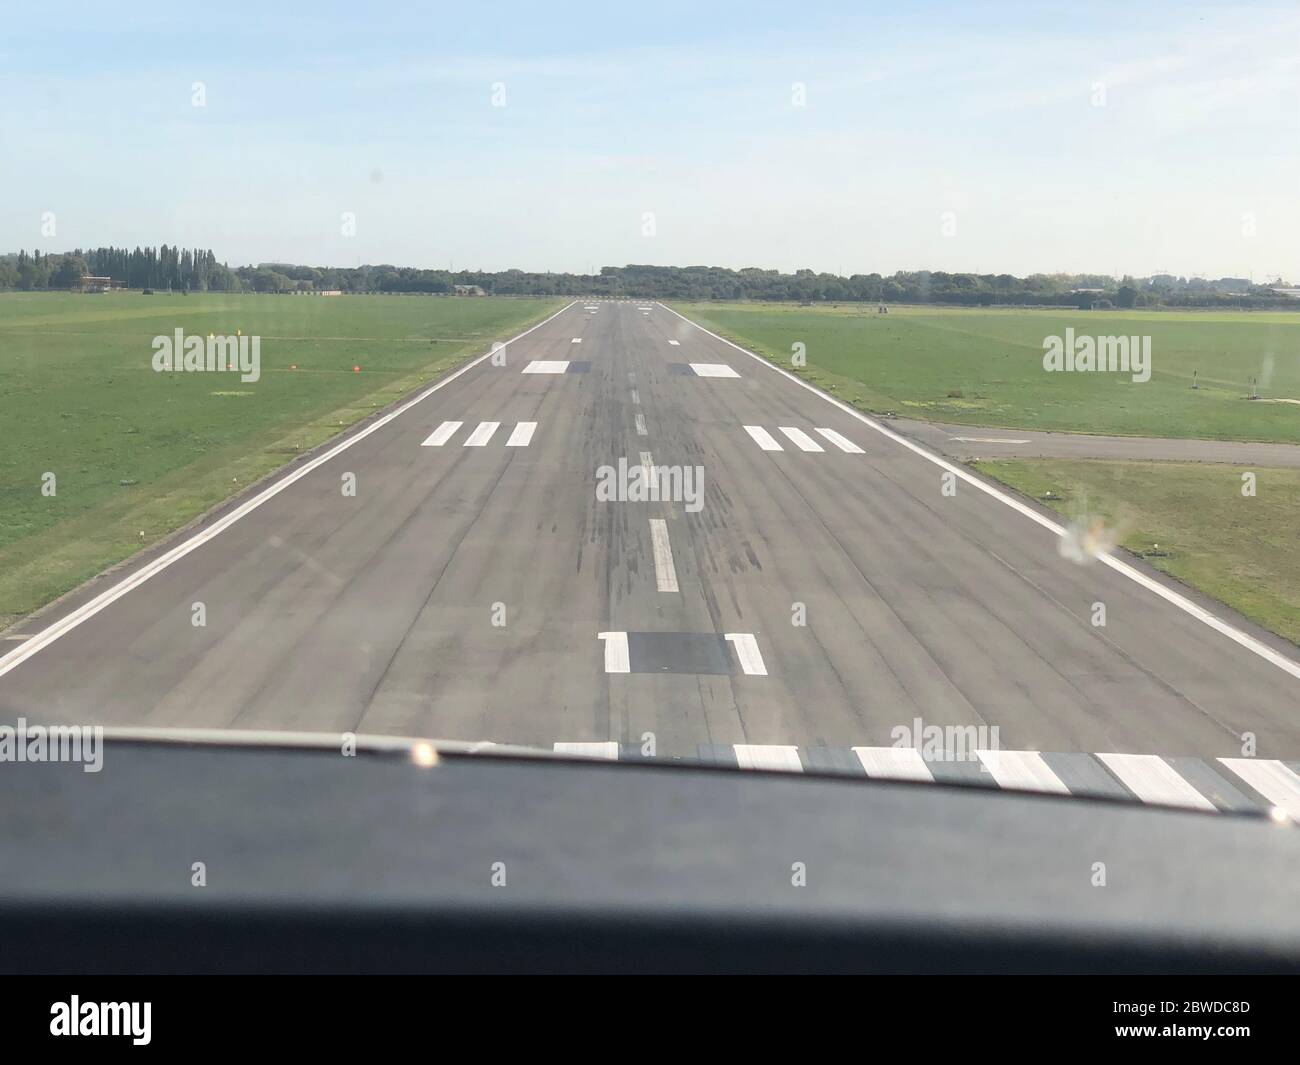 Approaching a runway strip with a propeller plane Stock Photo